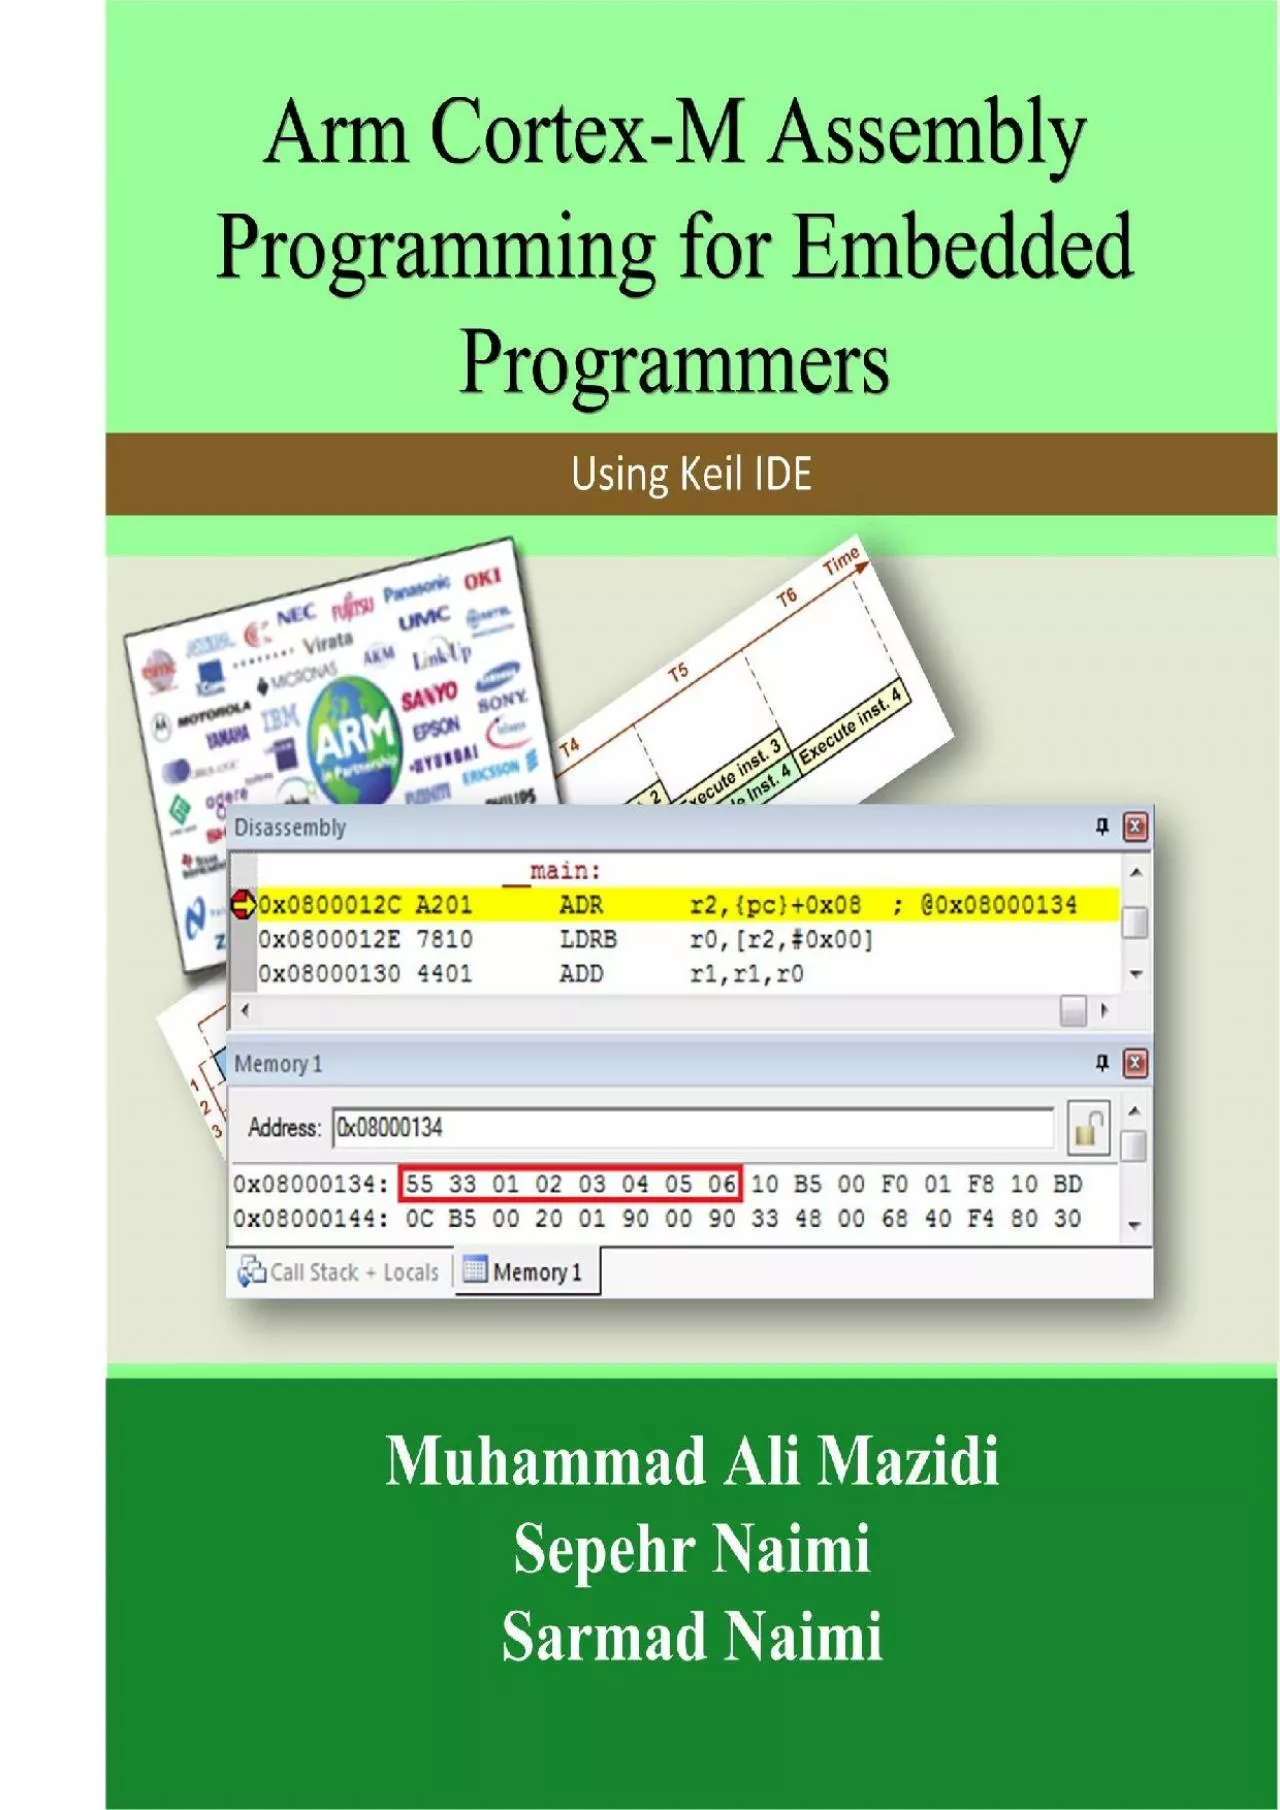 [PDF]-Arm Cortex-M Assembly Programming for Embedded Programmers: Using Keil